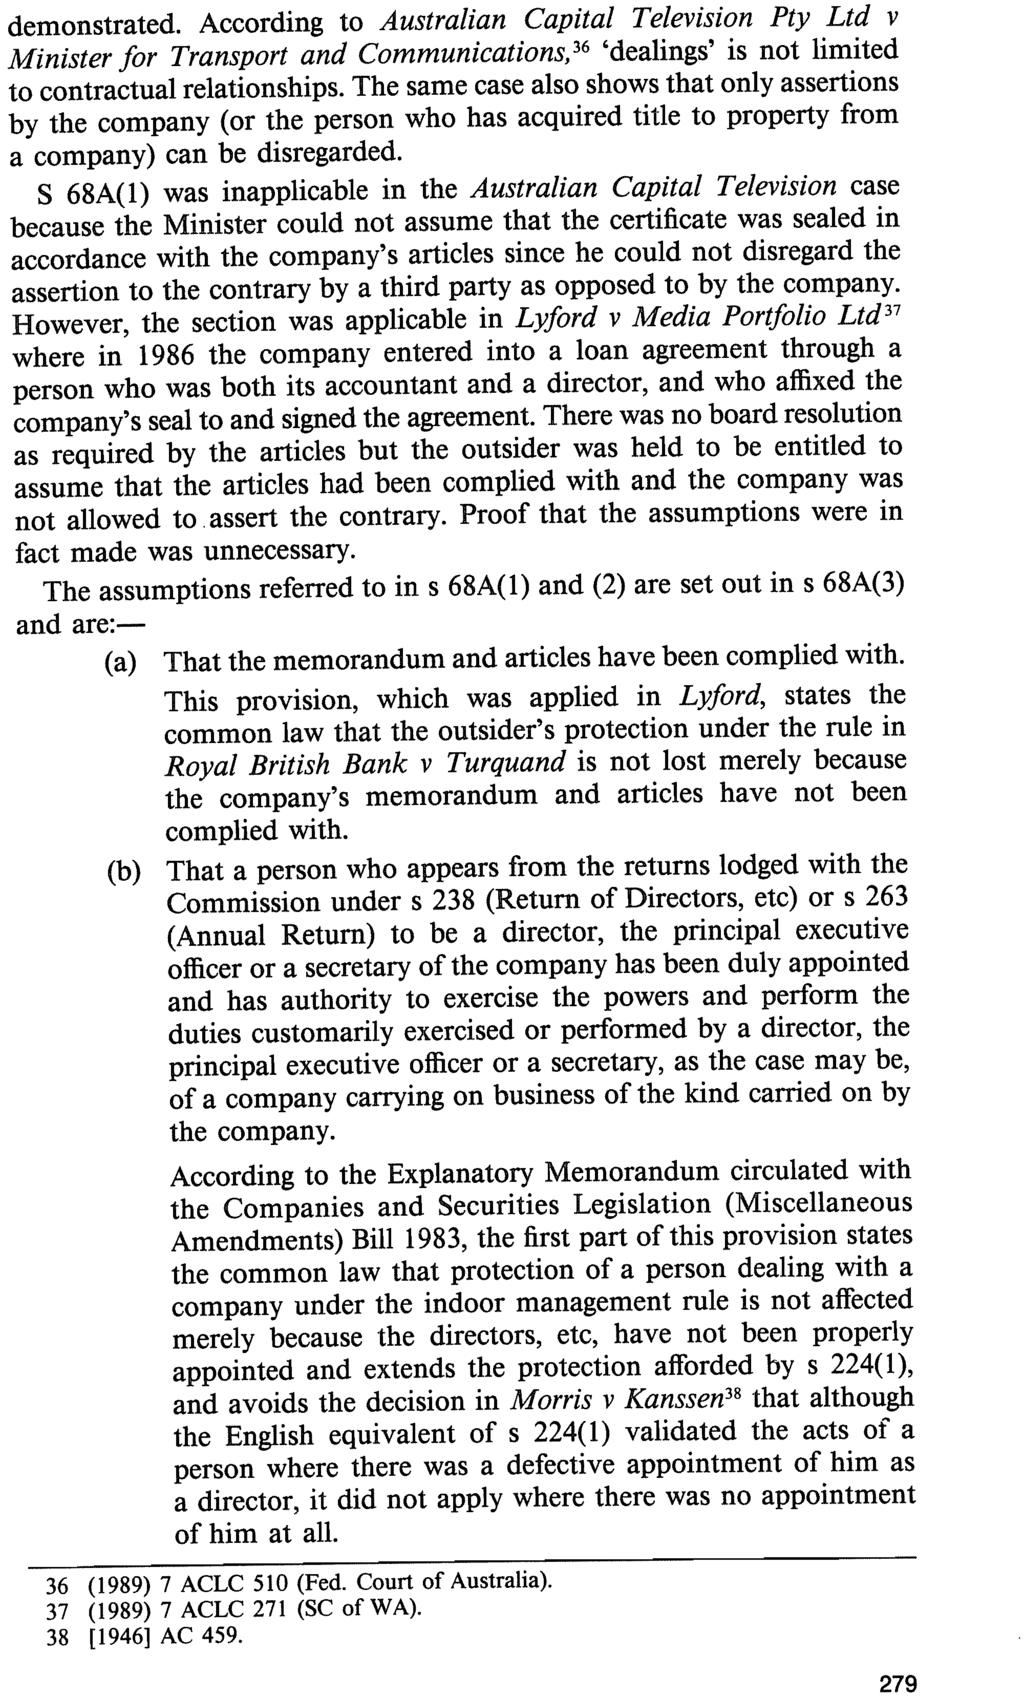 demonstrated. According to Australian Capital Television Pty Ltd v Minister for Transport and Communications, 36 dealings is not limited to contractual relationships.